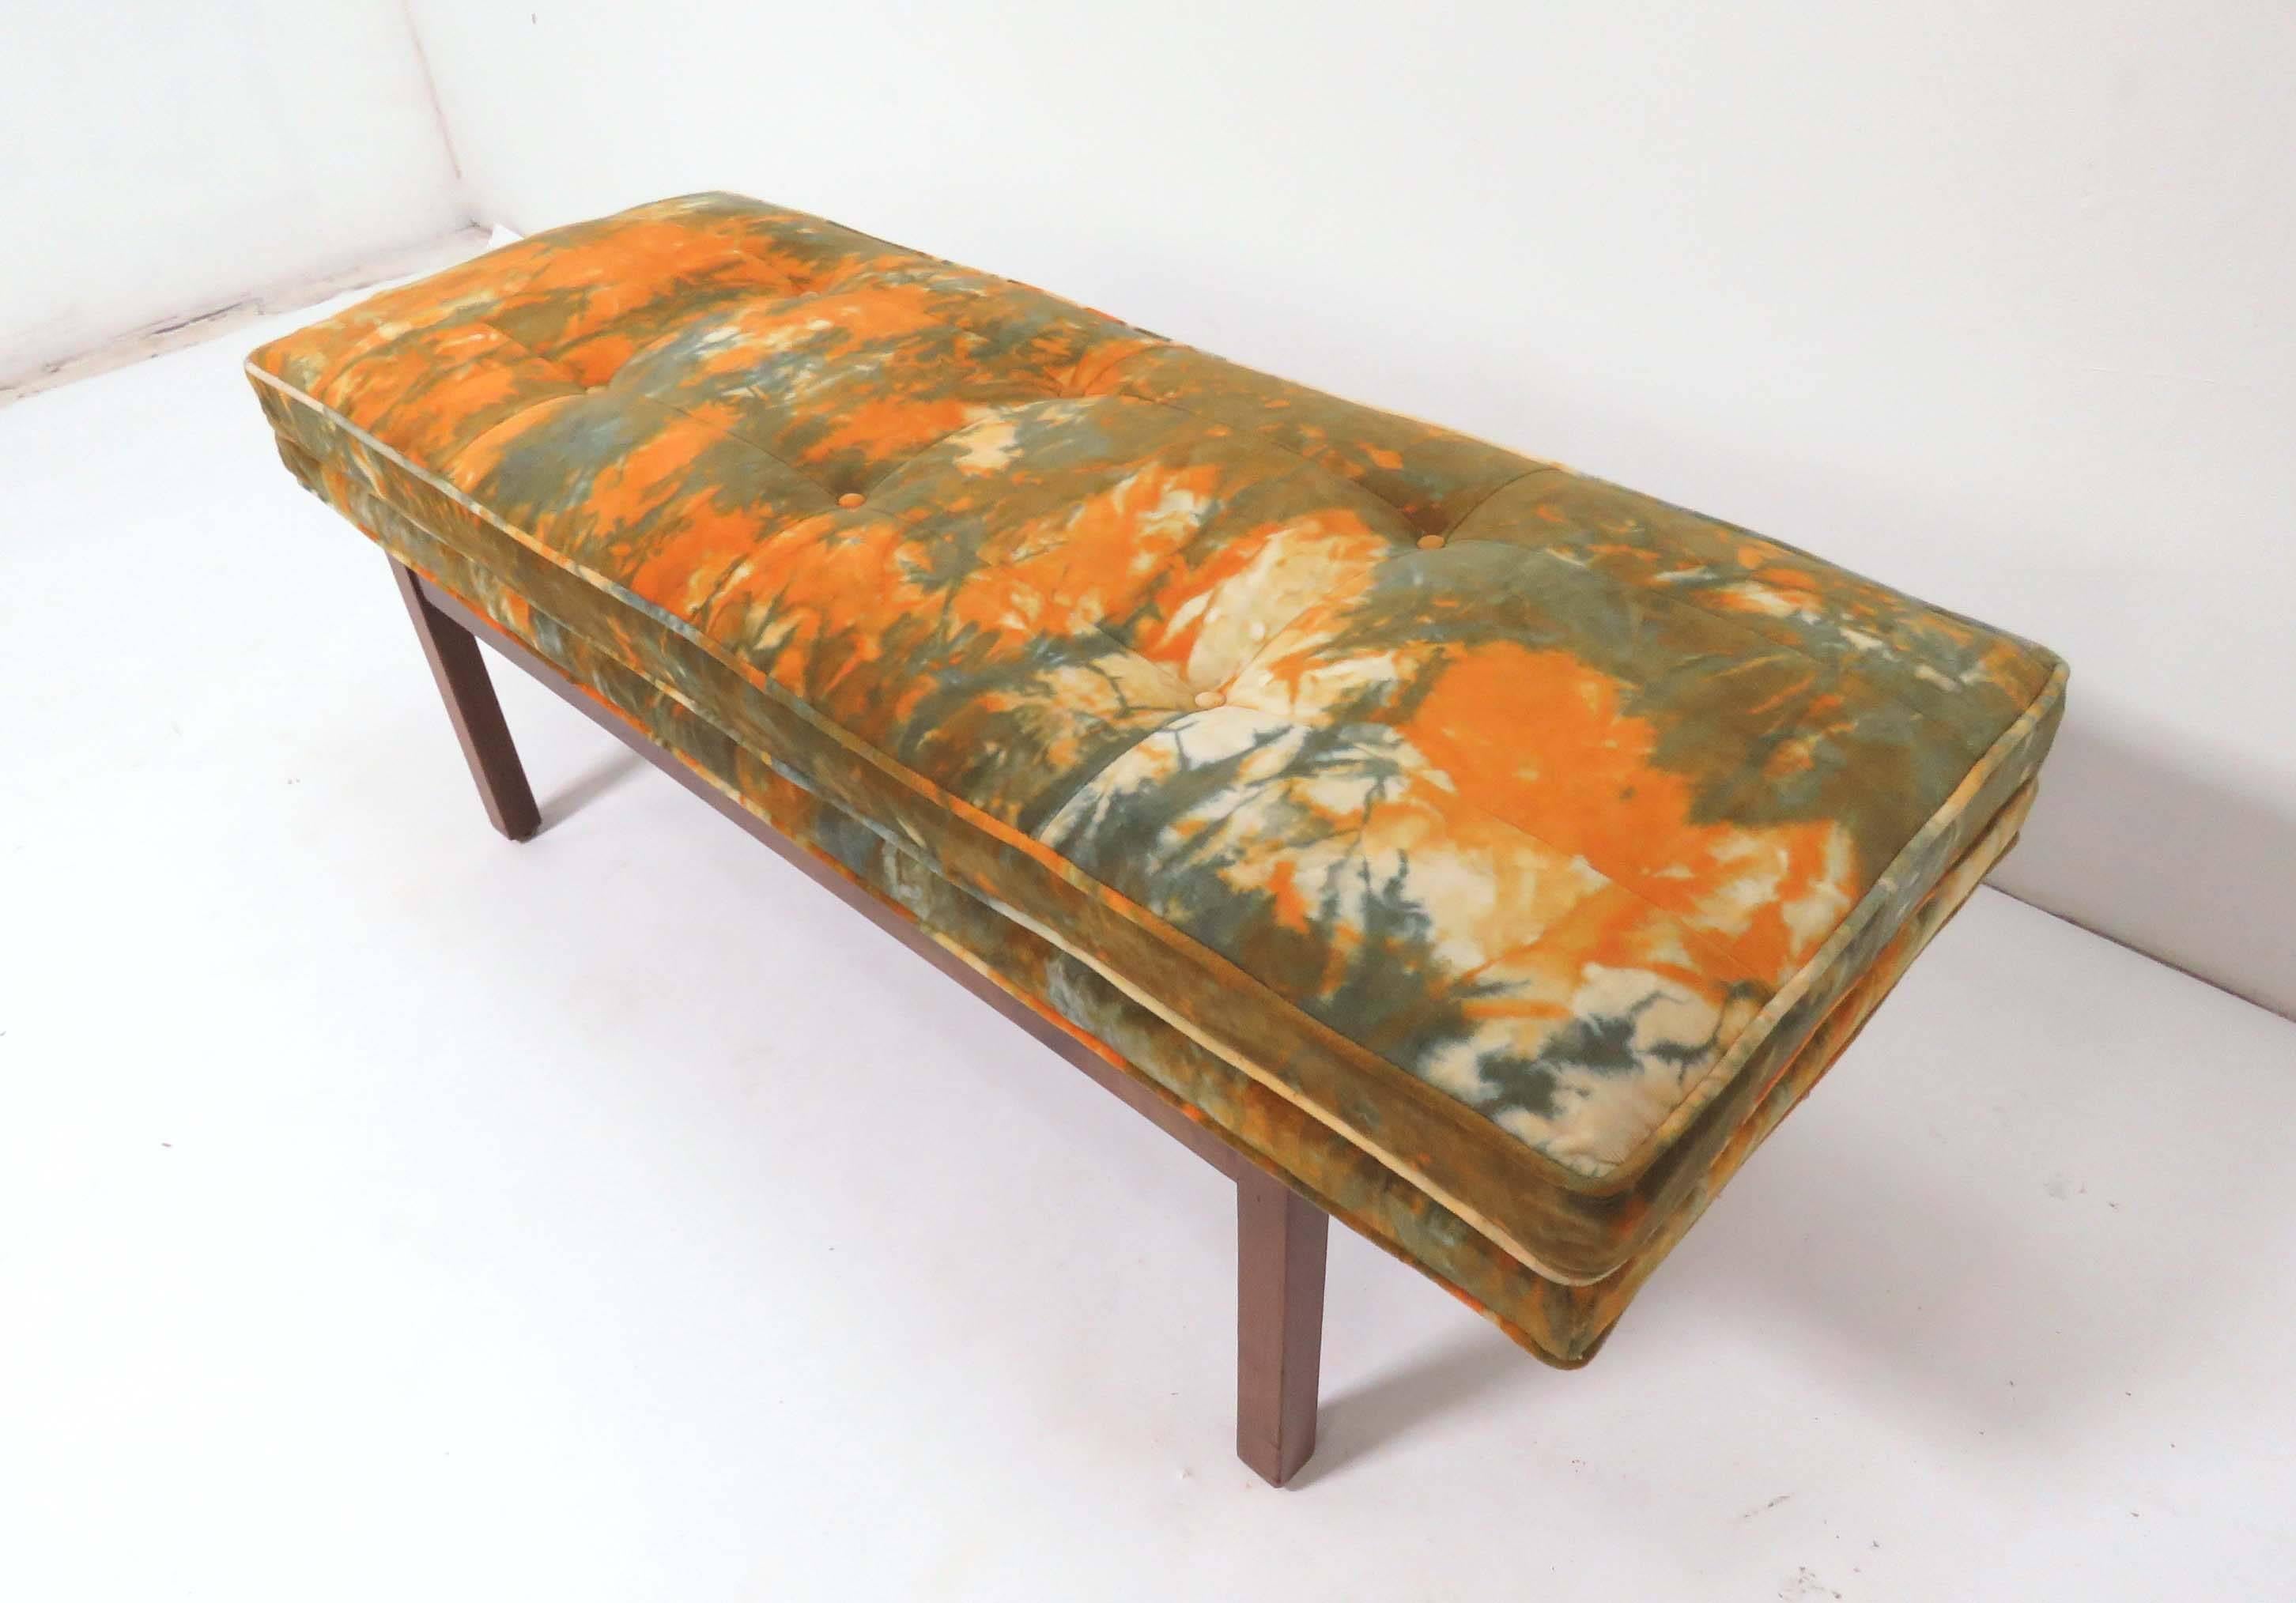 Mid-Century Modern bench with a walnut base, retaining its original velvet upholstery in an abstract floral tie-dye pattern reminiscent of the designs of Jack Lenor Larsen.